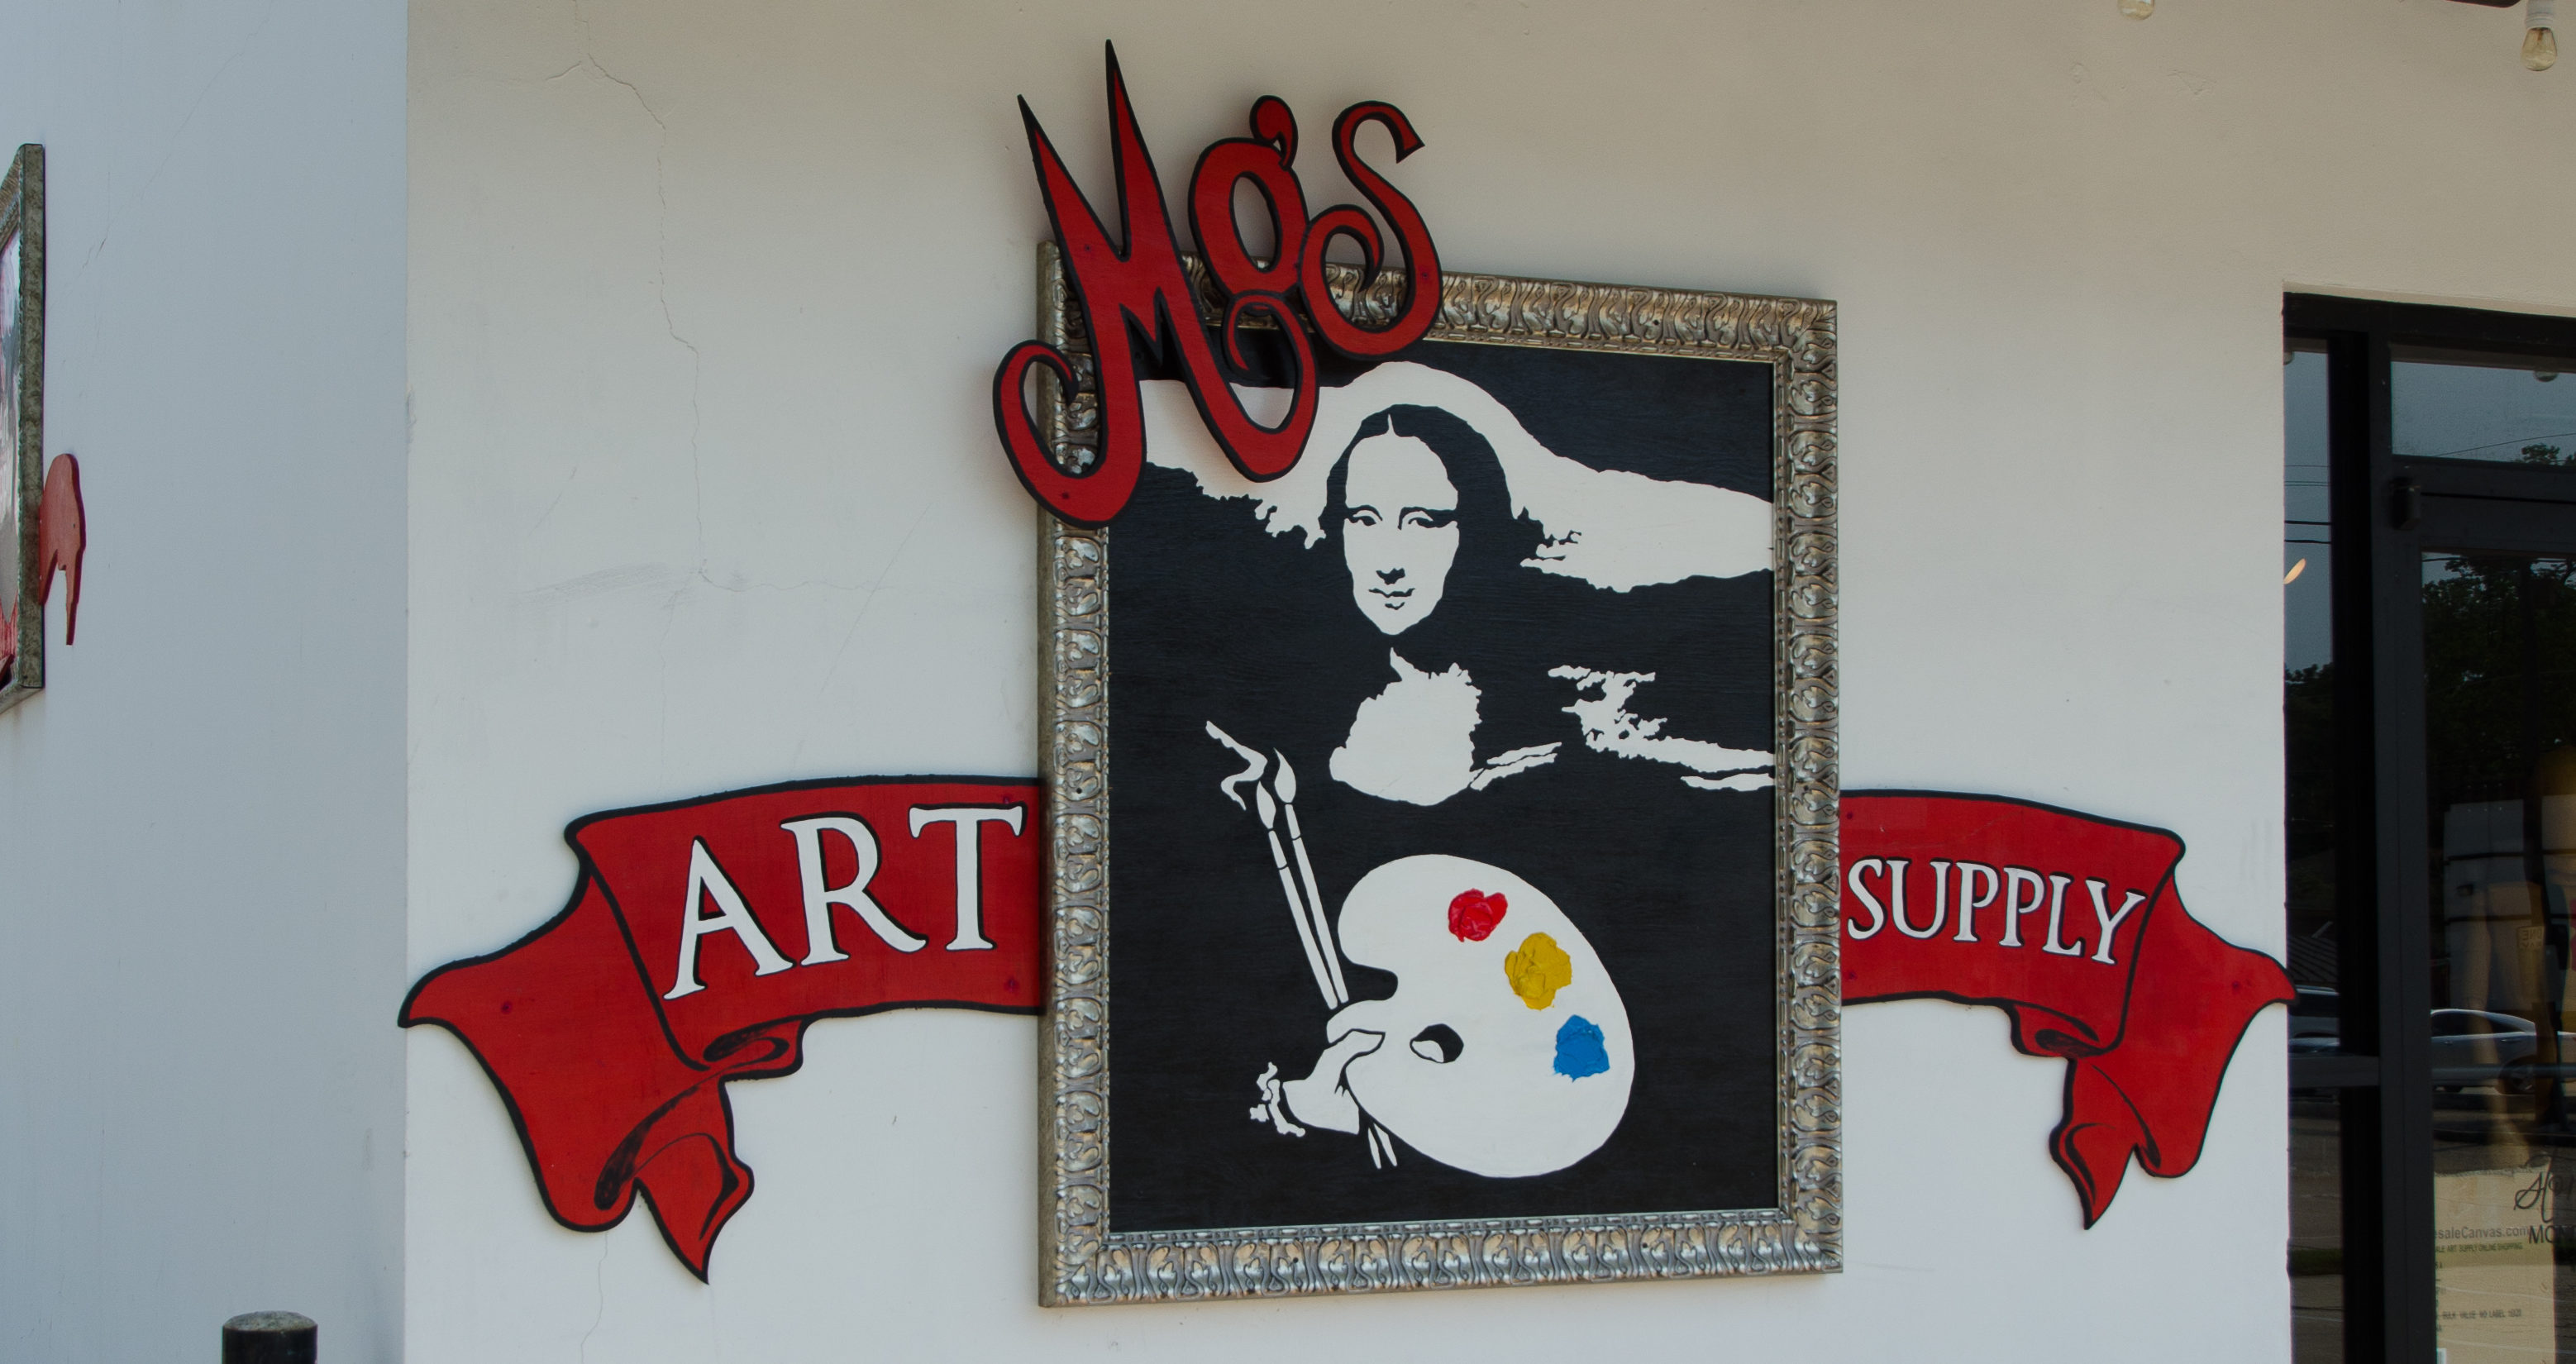 Local shop Mo's Art Supply is full of unique art supplies